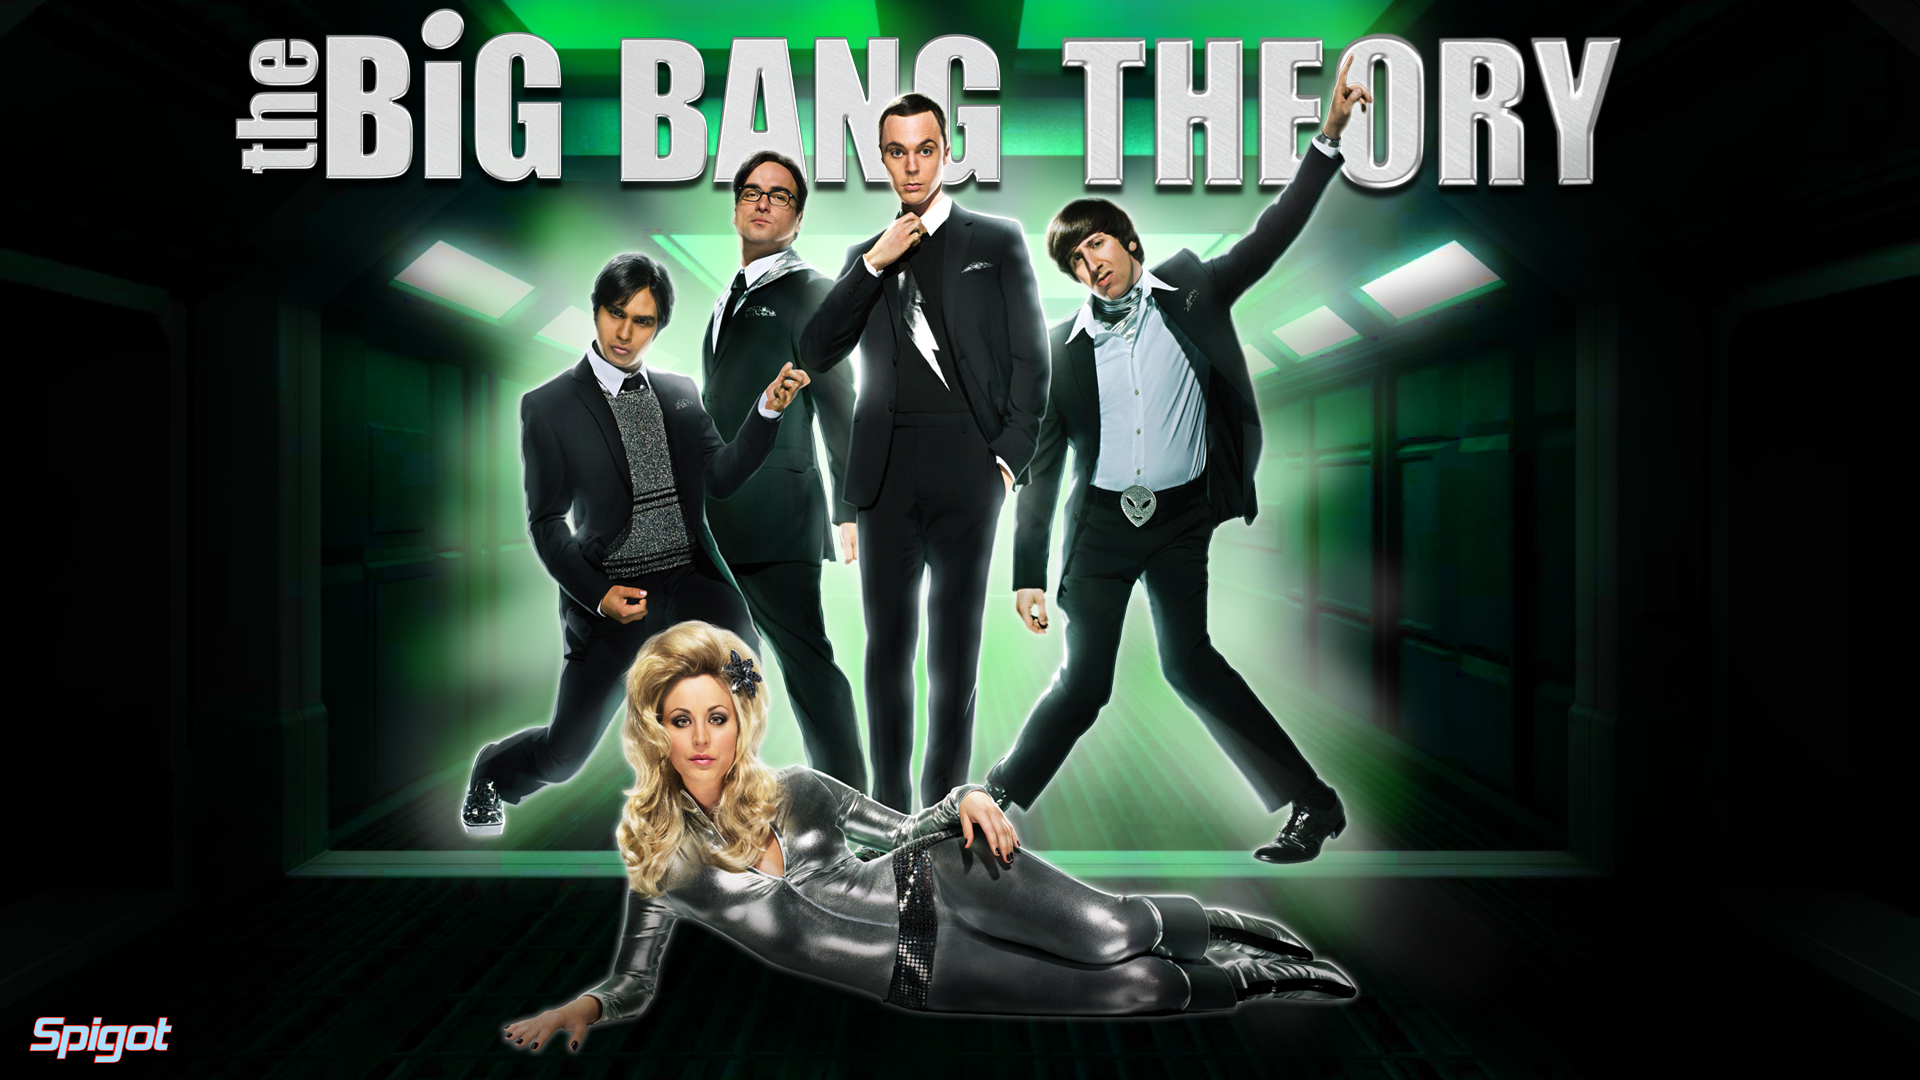 Here S A Wallpaper I Made Of This Awesome Show The Big Bang Theory